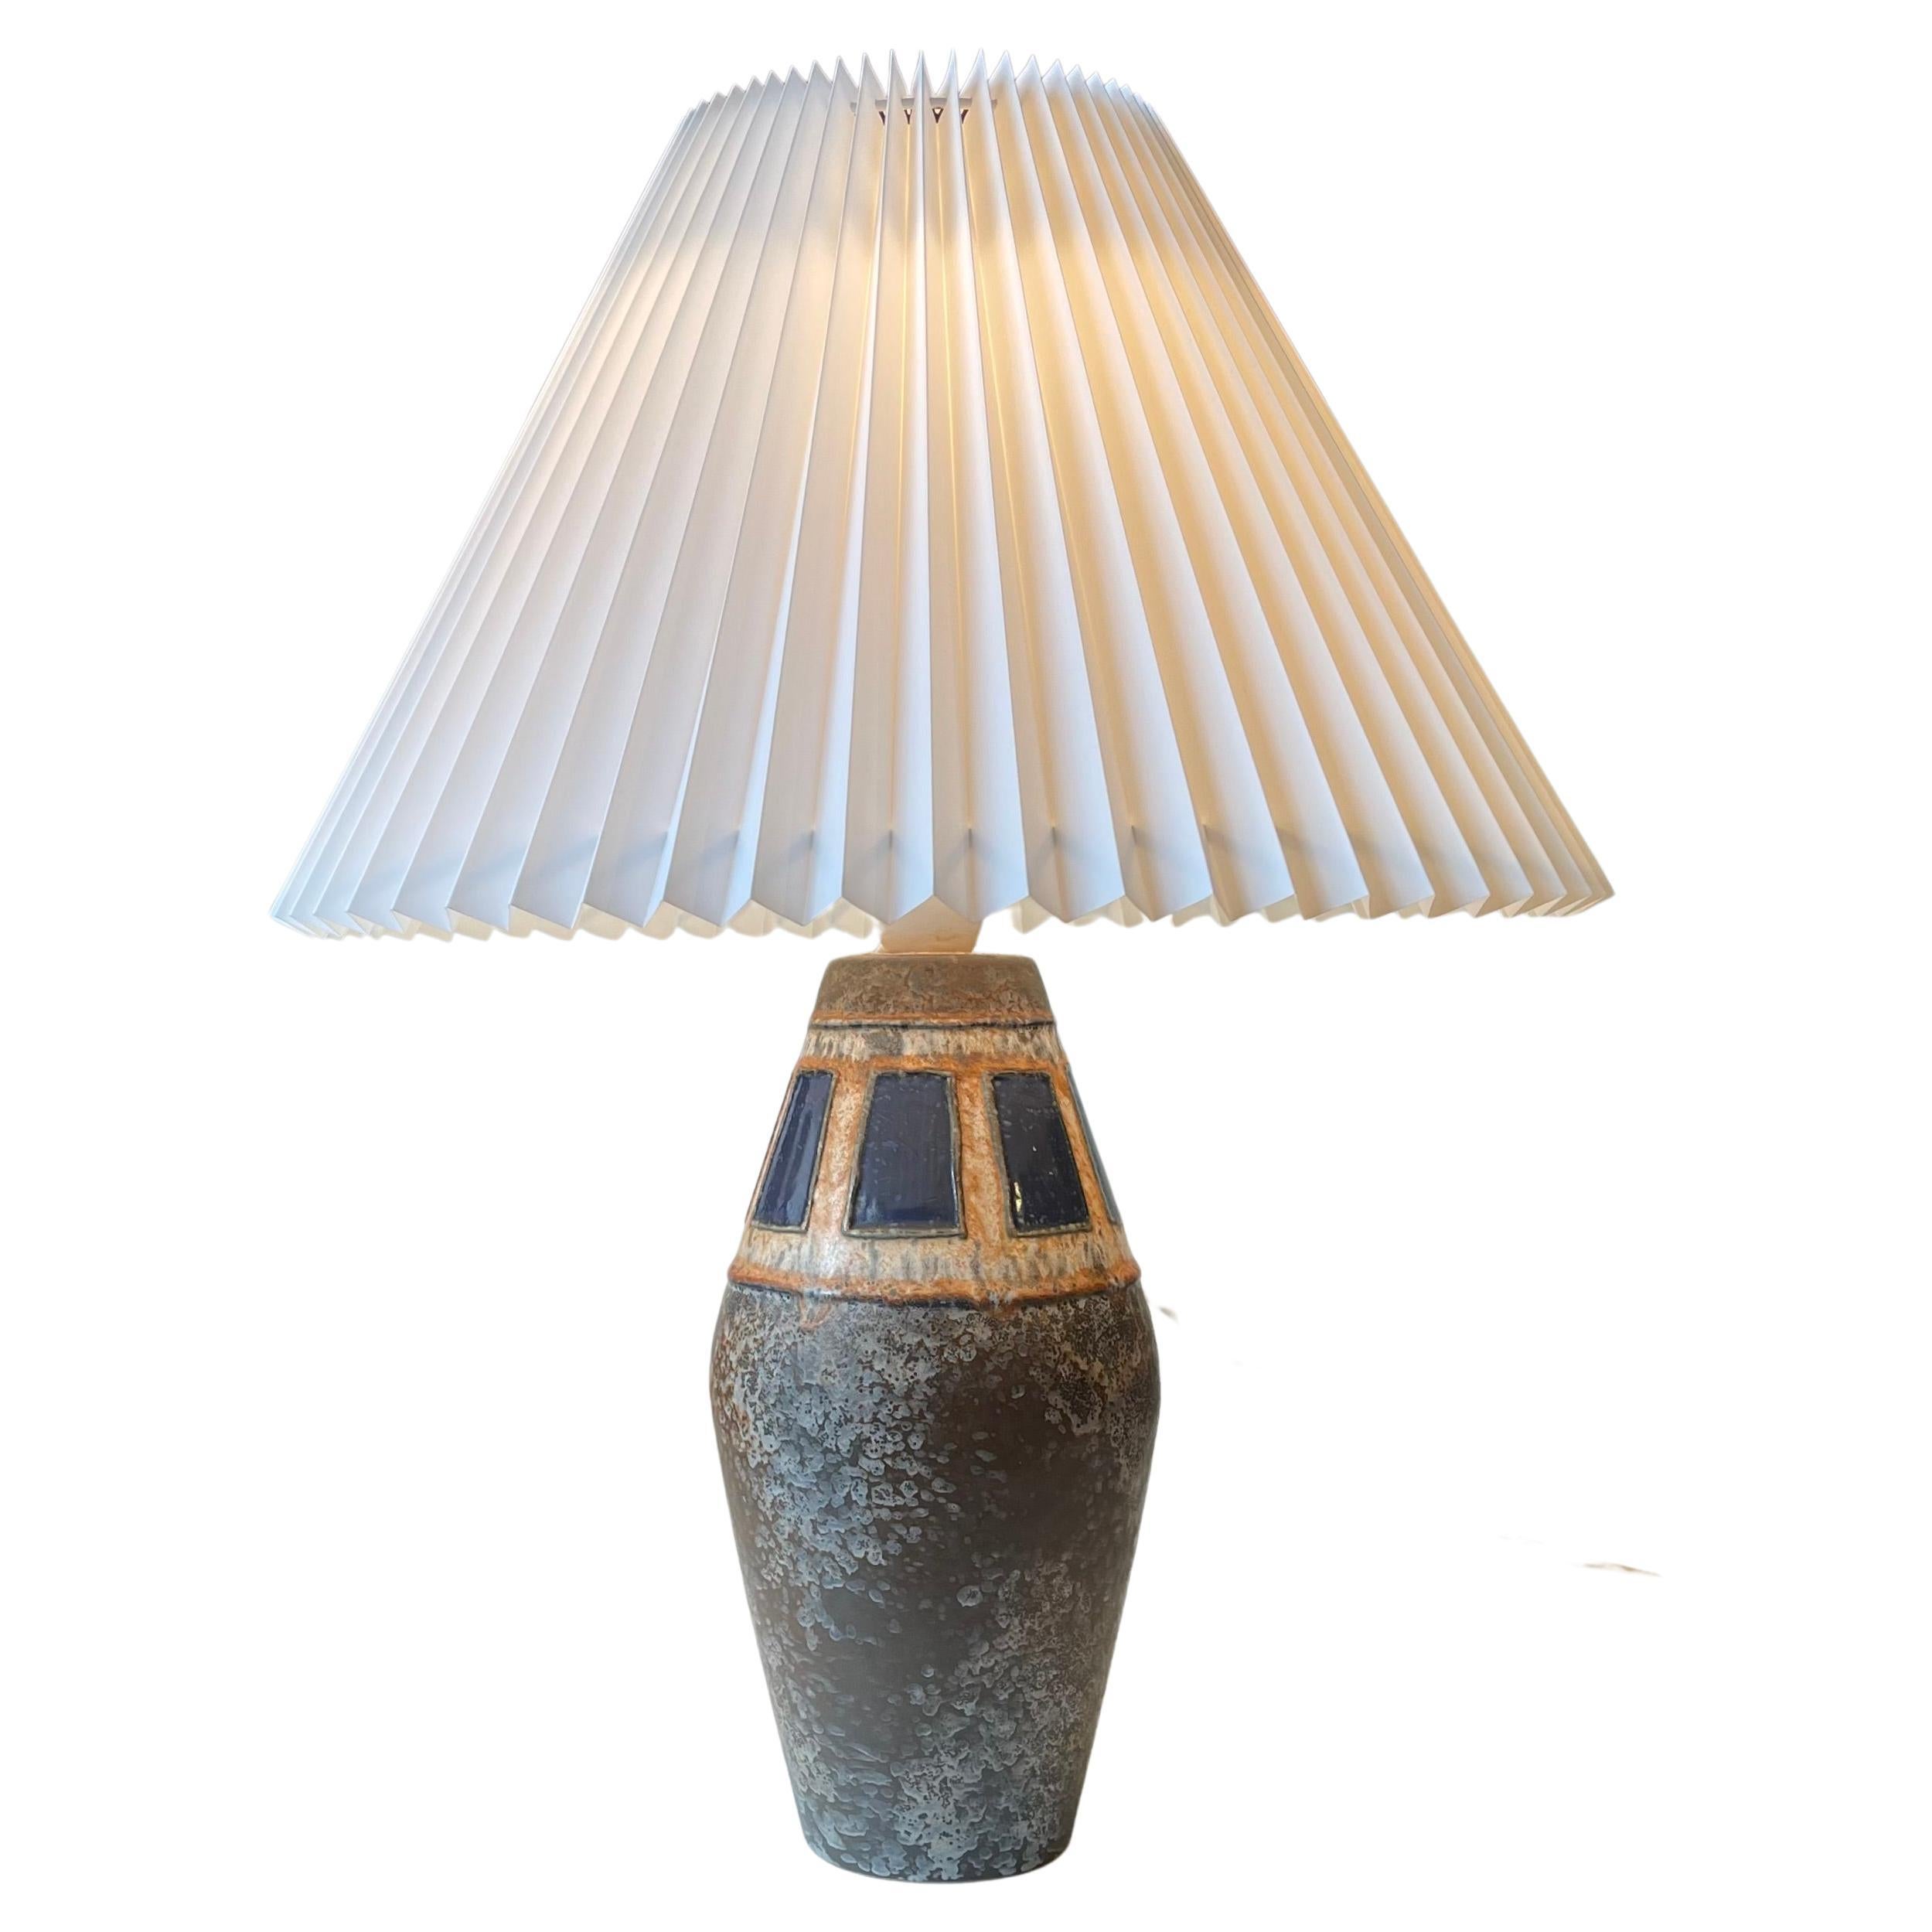 Midcentury Western Germany Ceramic Table Lamp in Earthy Lava Ash Glazes